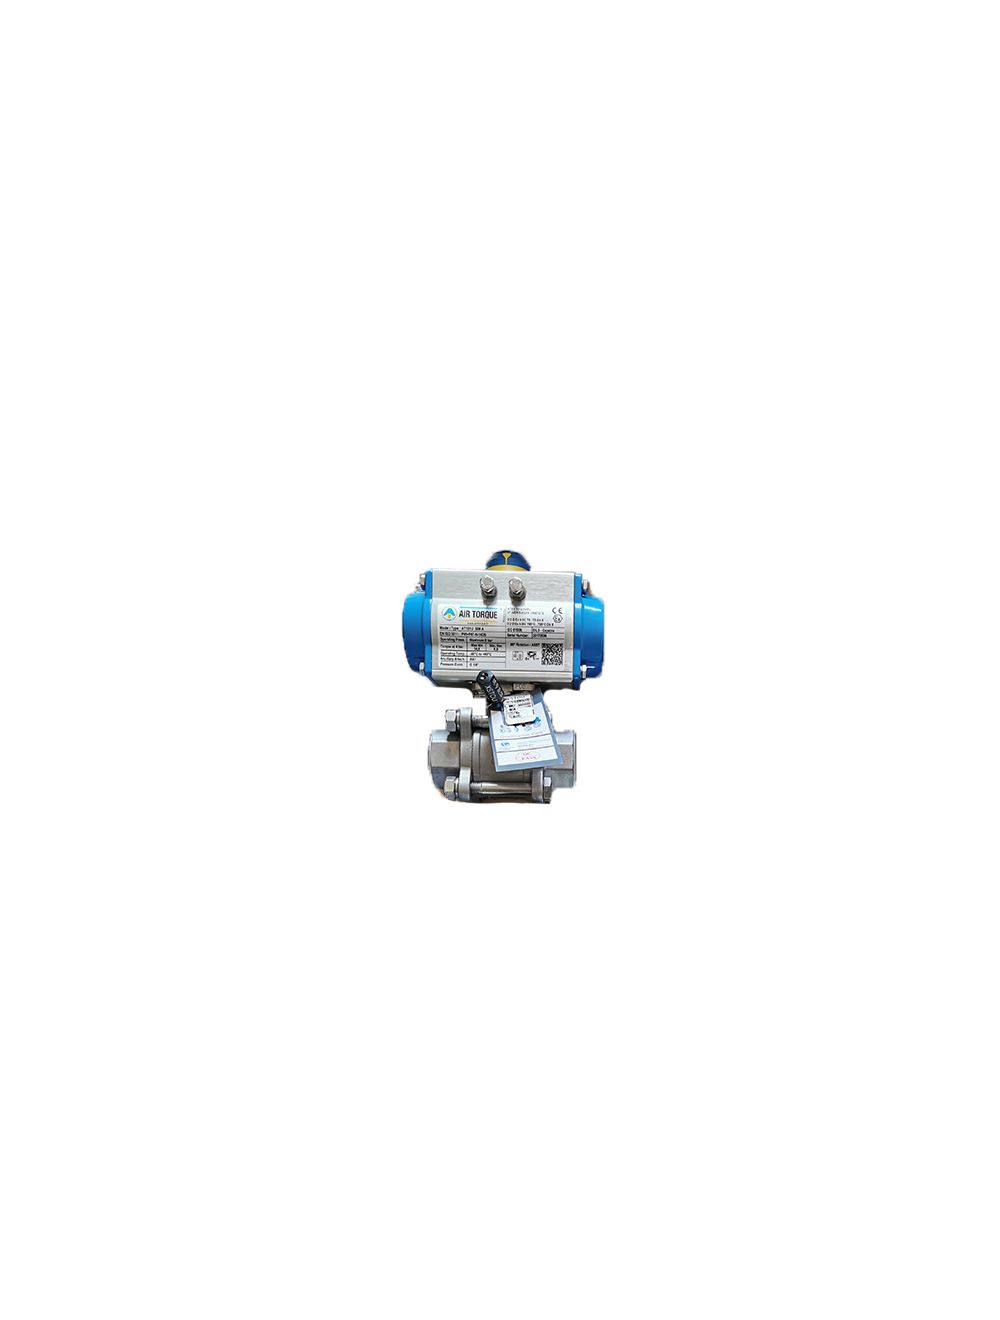 New In stock for sale, AIR TORQUE Ball Valve AT051US4A